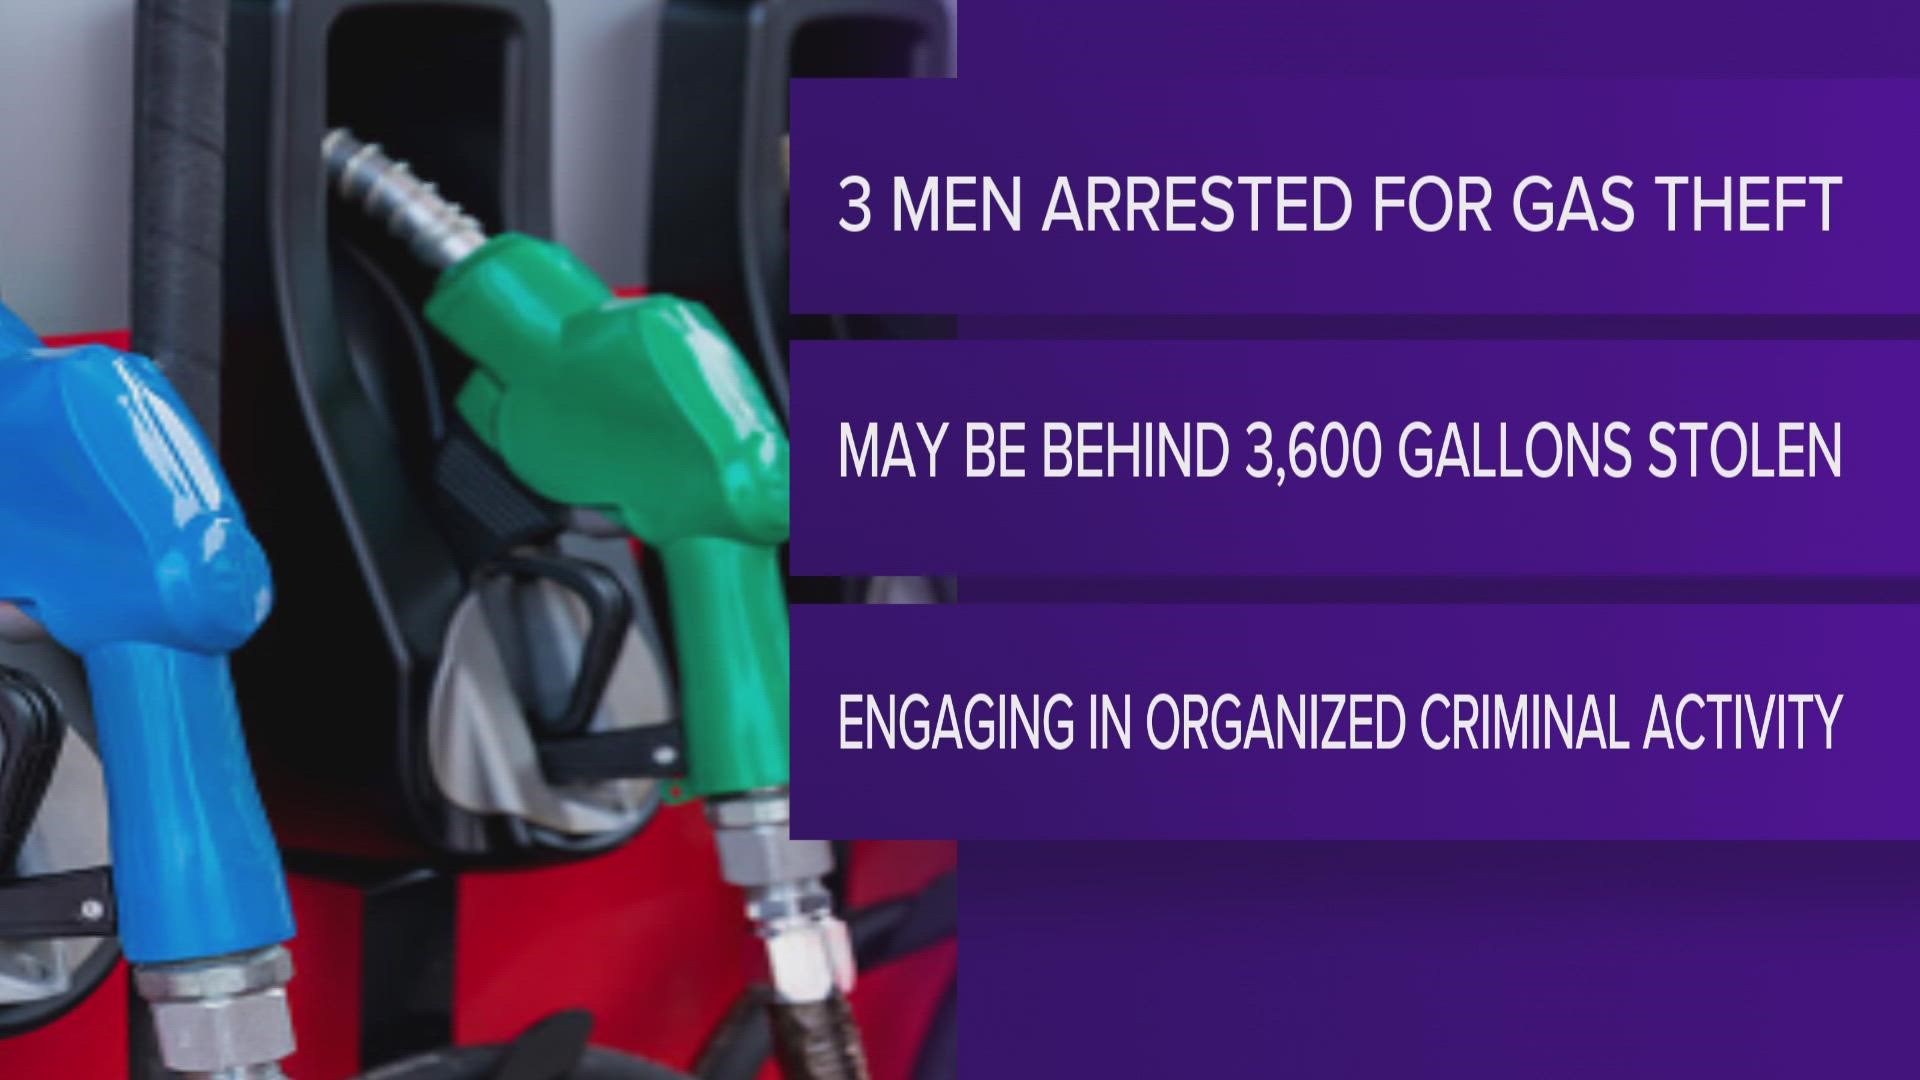 The male suspects attempted to illegally obtain gas at a Kent Kwik by tampering with the fuel pump.